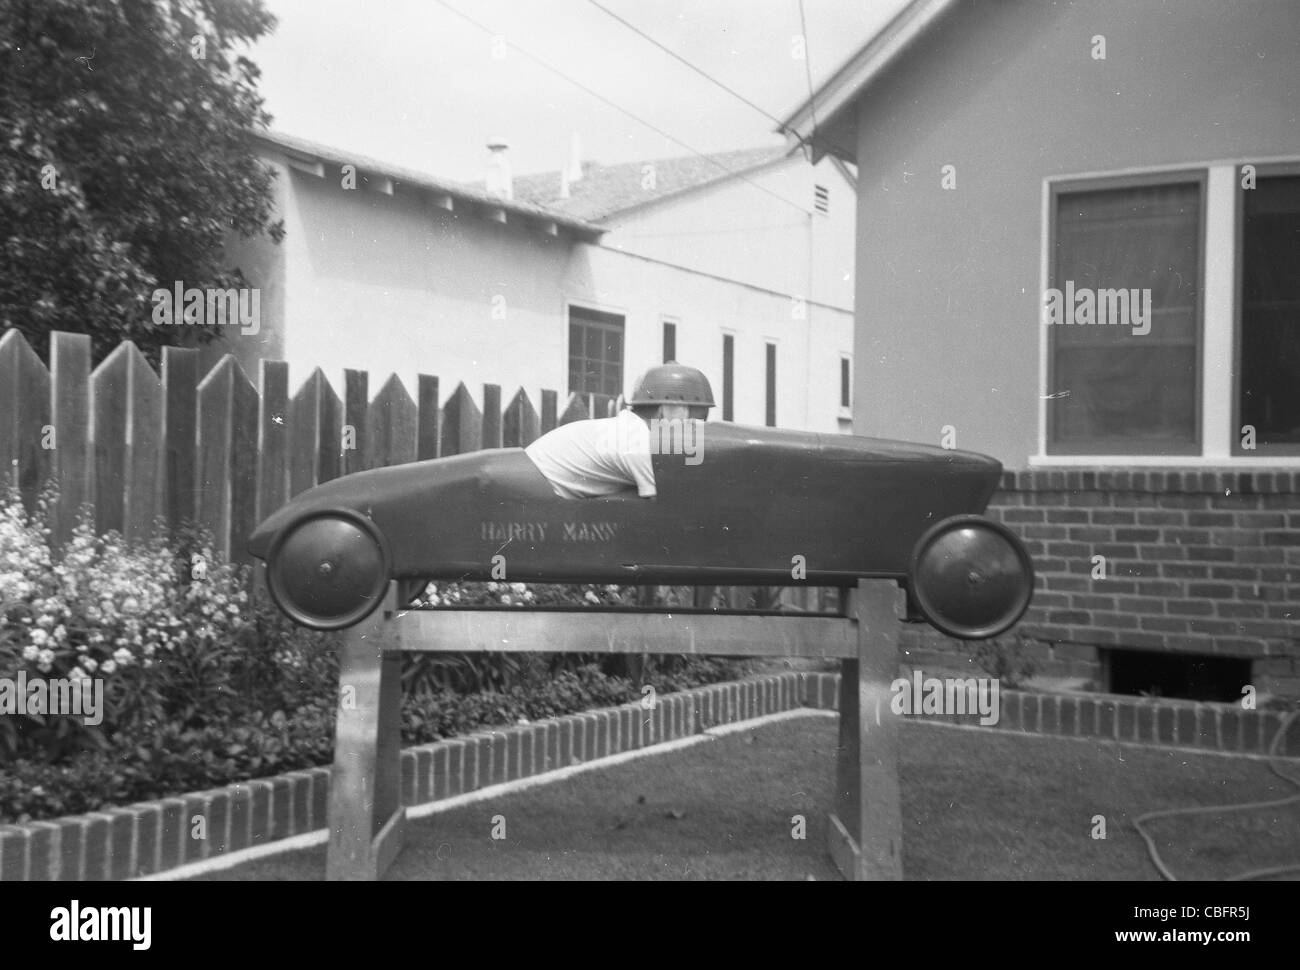 1950s Sports Car High Resolution Stock Photography and Images - Alamy